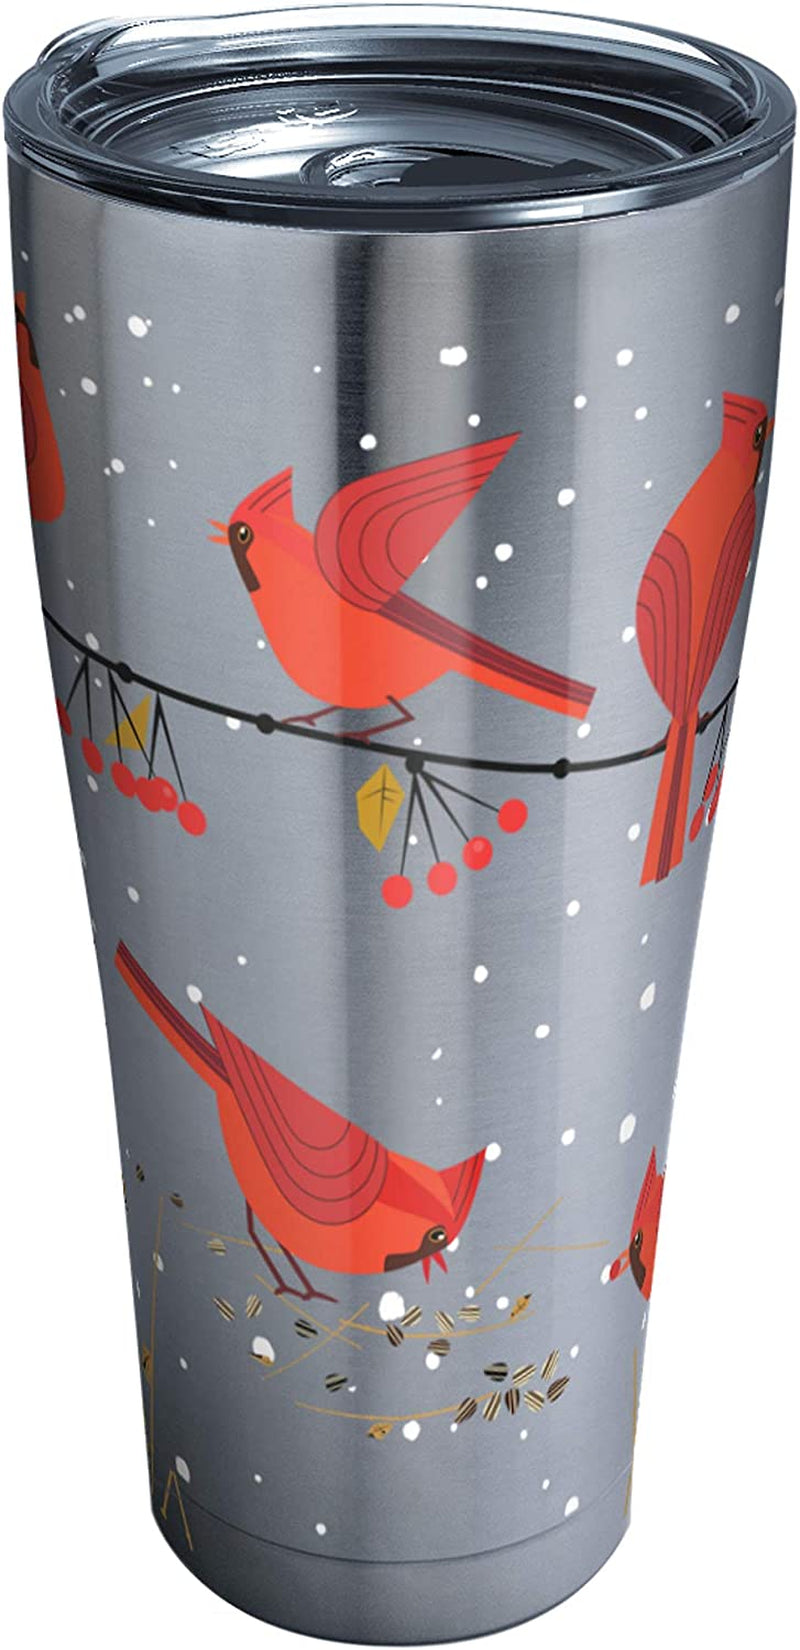 Tervis Made in USA Double Walled Festive Holiday Season Cardinals Insulated Tumbler Cup Keeps Drinks Cold & Hot, 16Oz Mug, Classic Home & Garden > Kitchen & Dining > Tableware > Drinkware Tervis Stainless Steel 30oz 